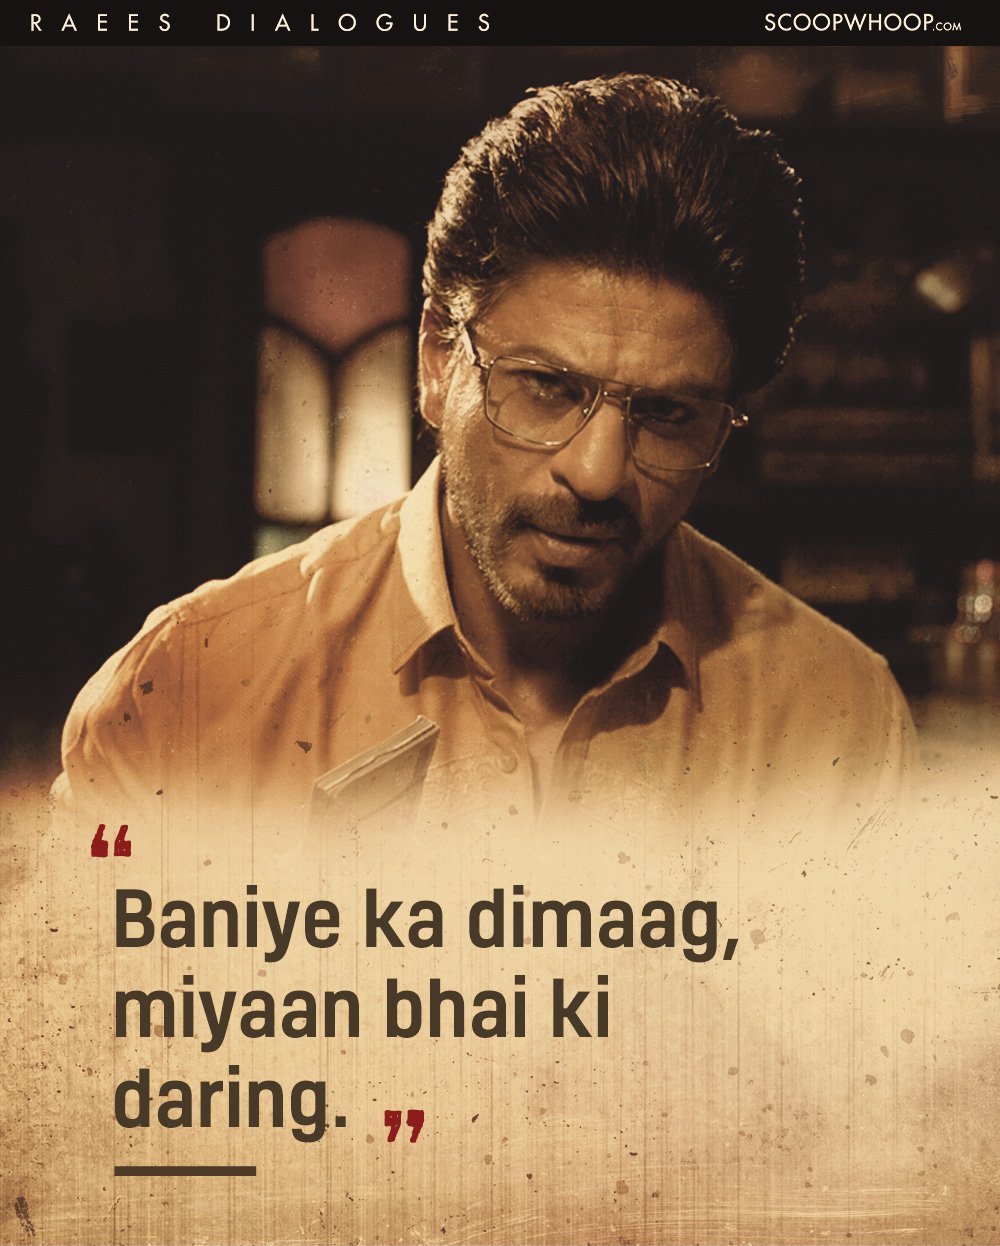 10 Best Dialogues From The Movie Raees